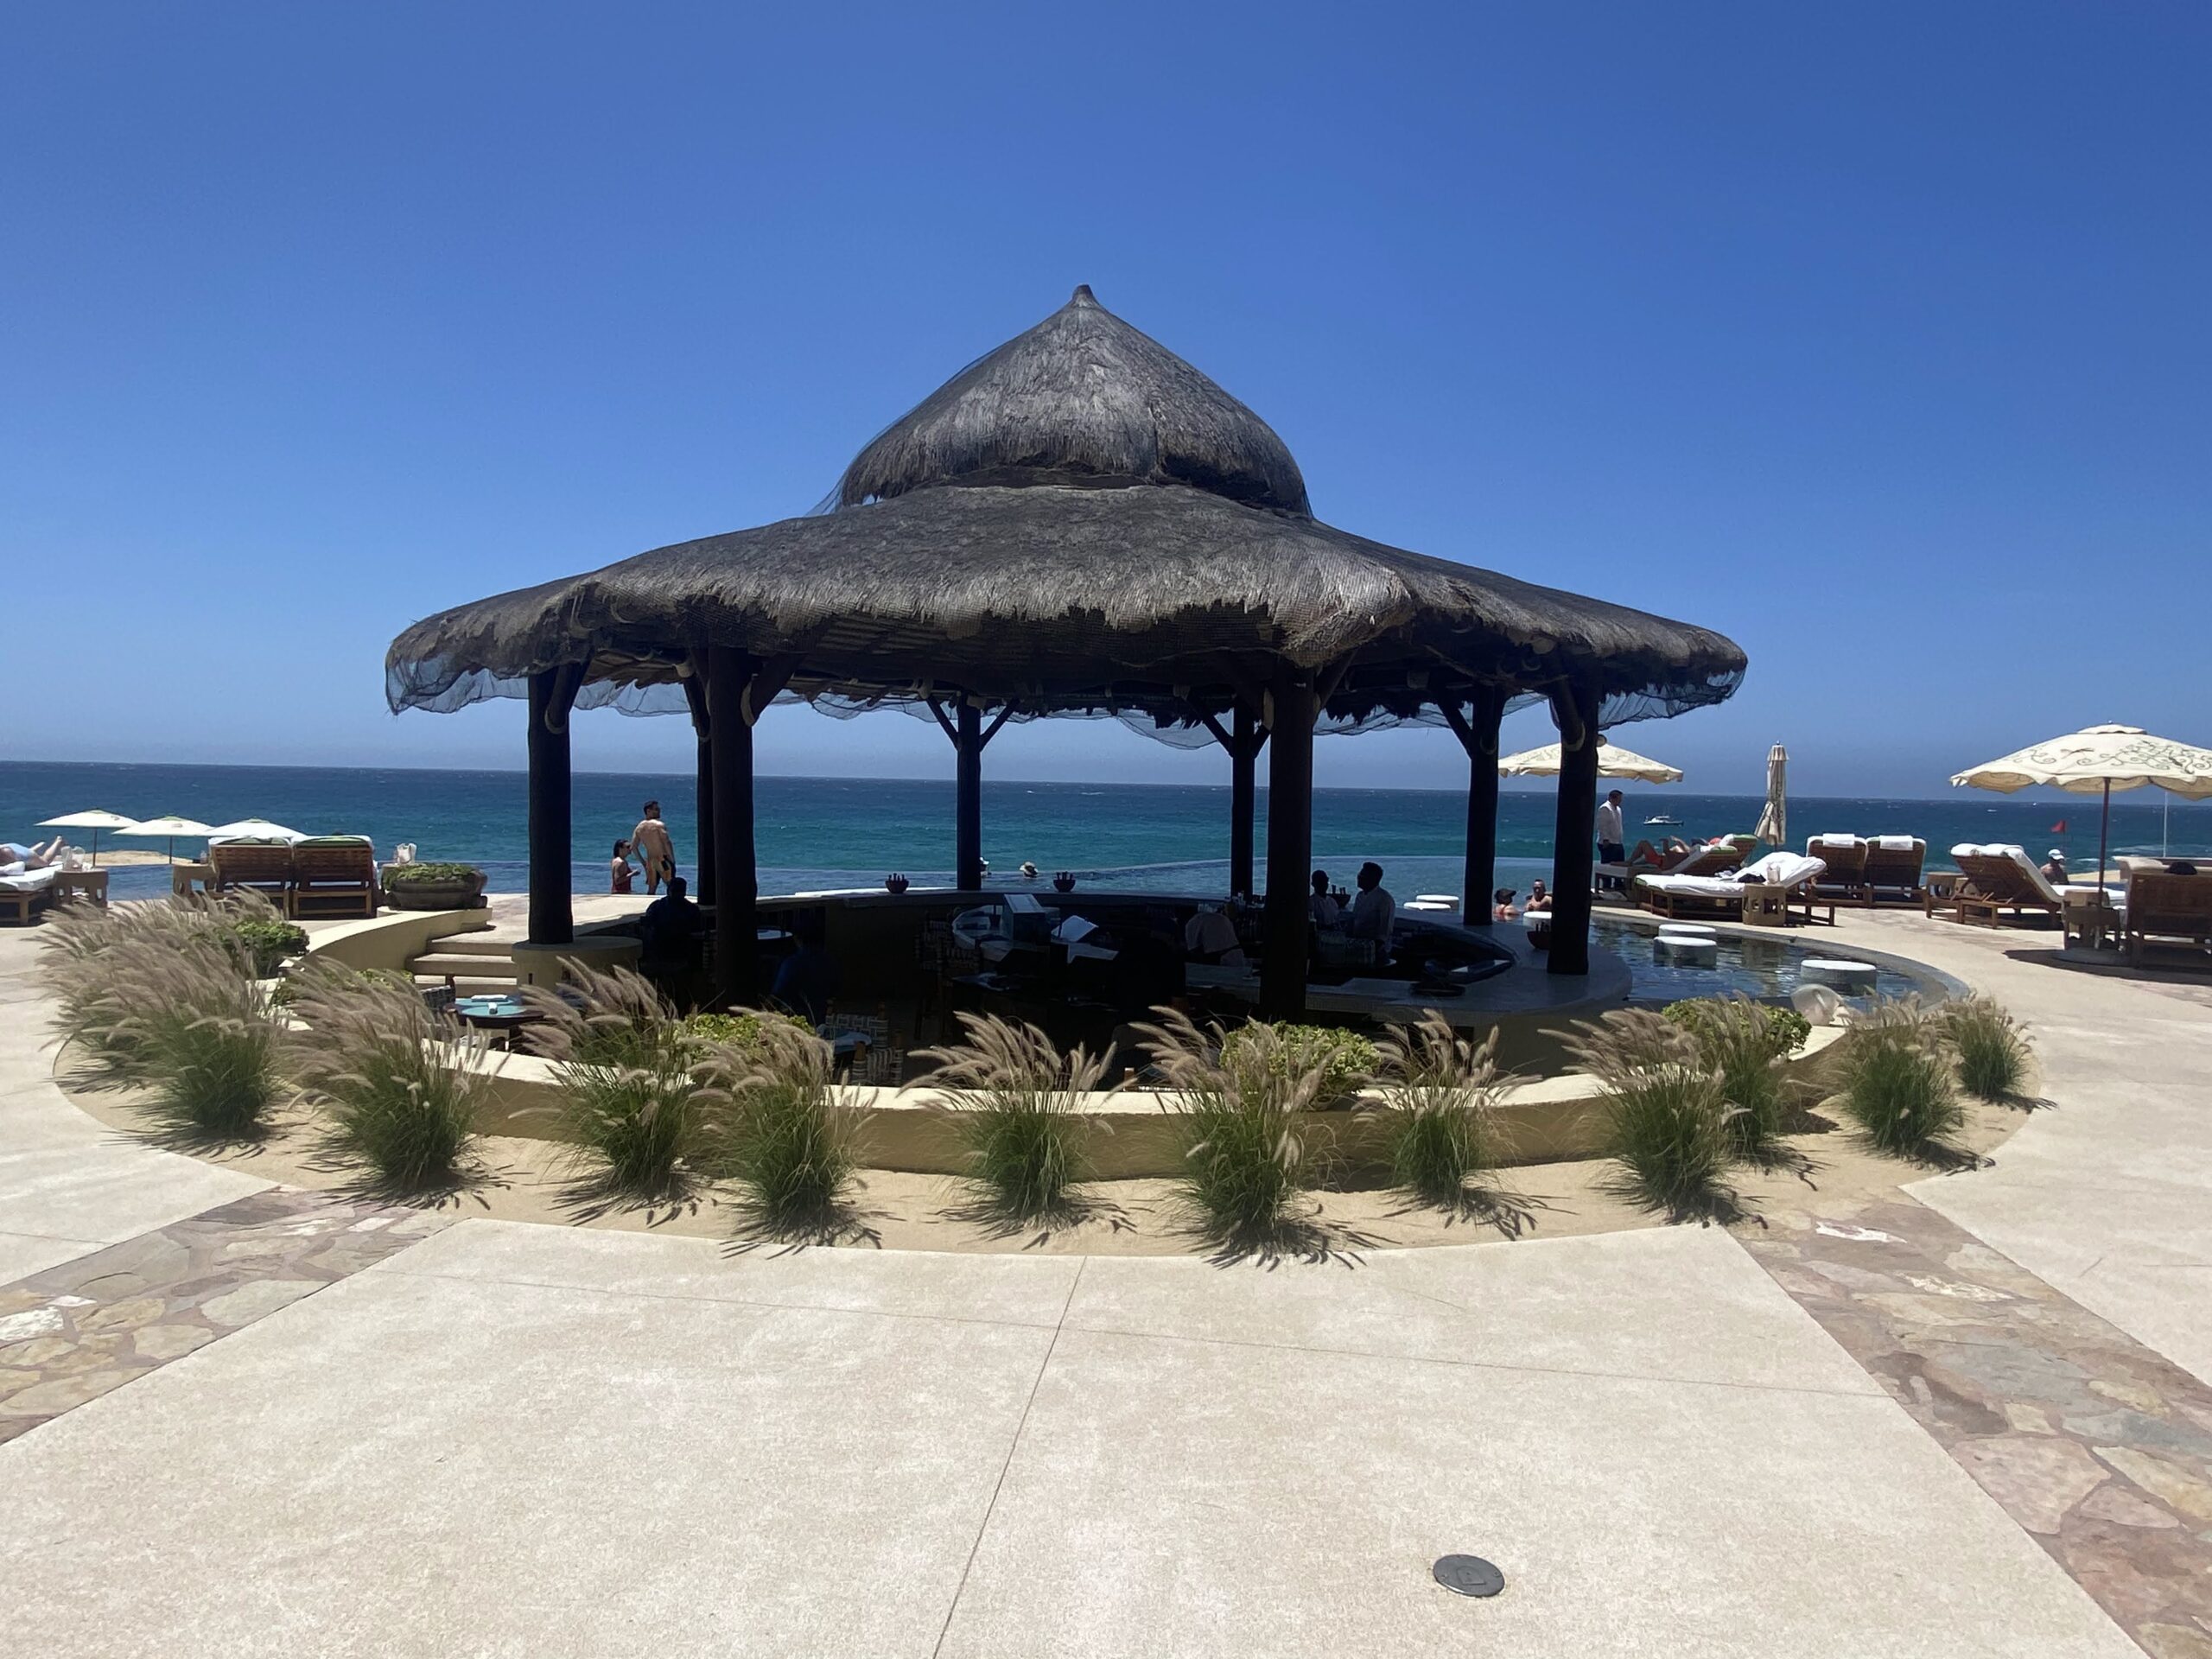 a thatched roof gazebo on a beach